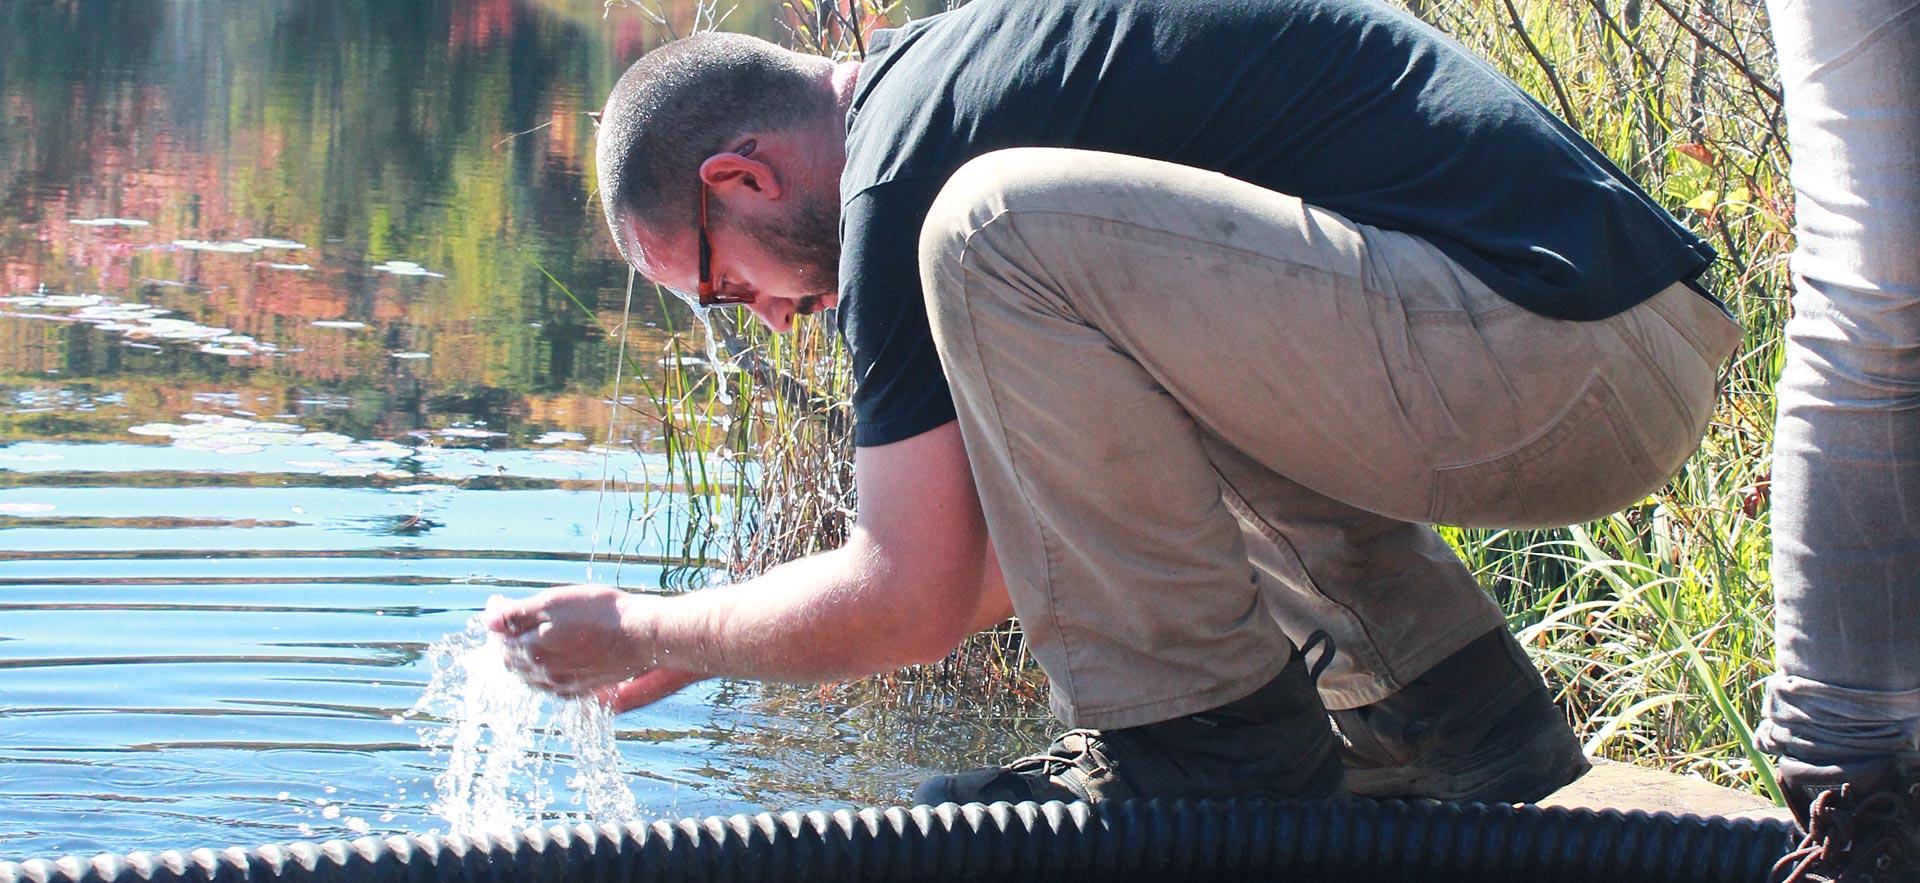 Male forestry conservation technician student cools off near river.